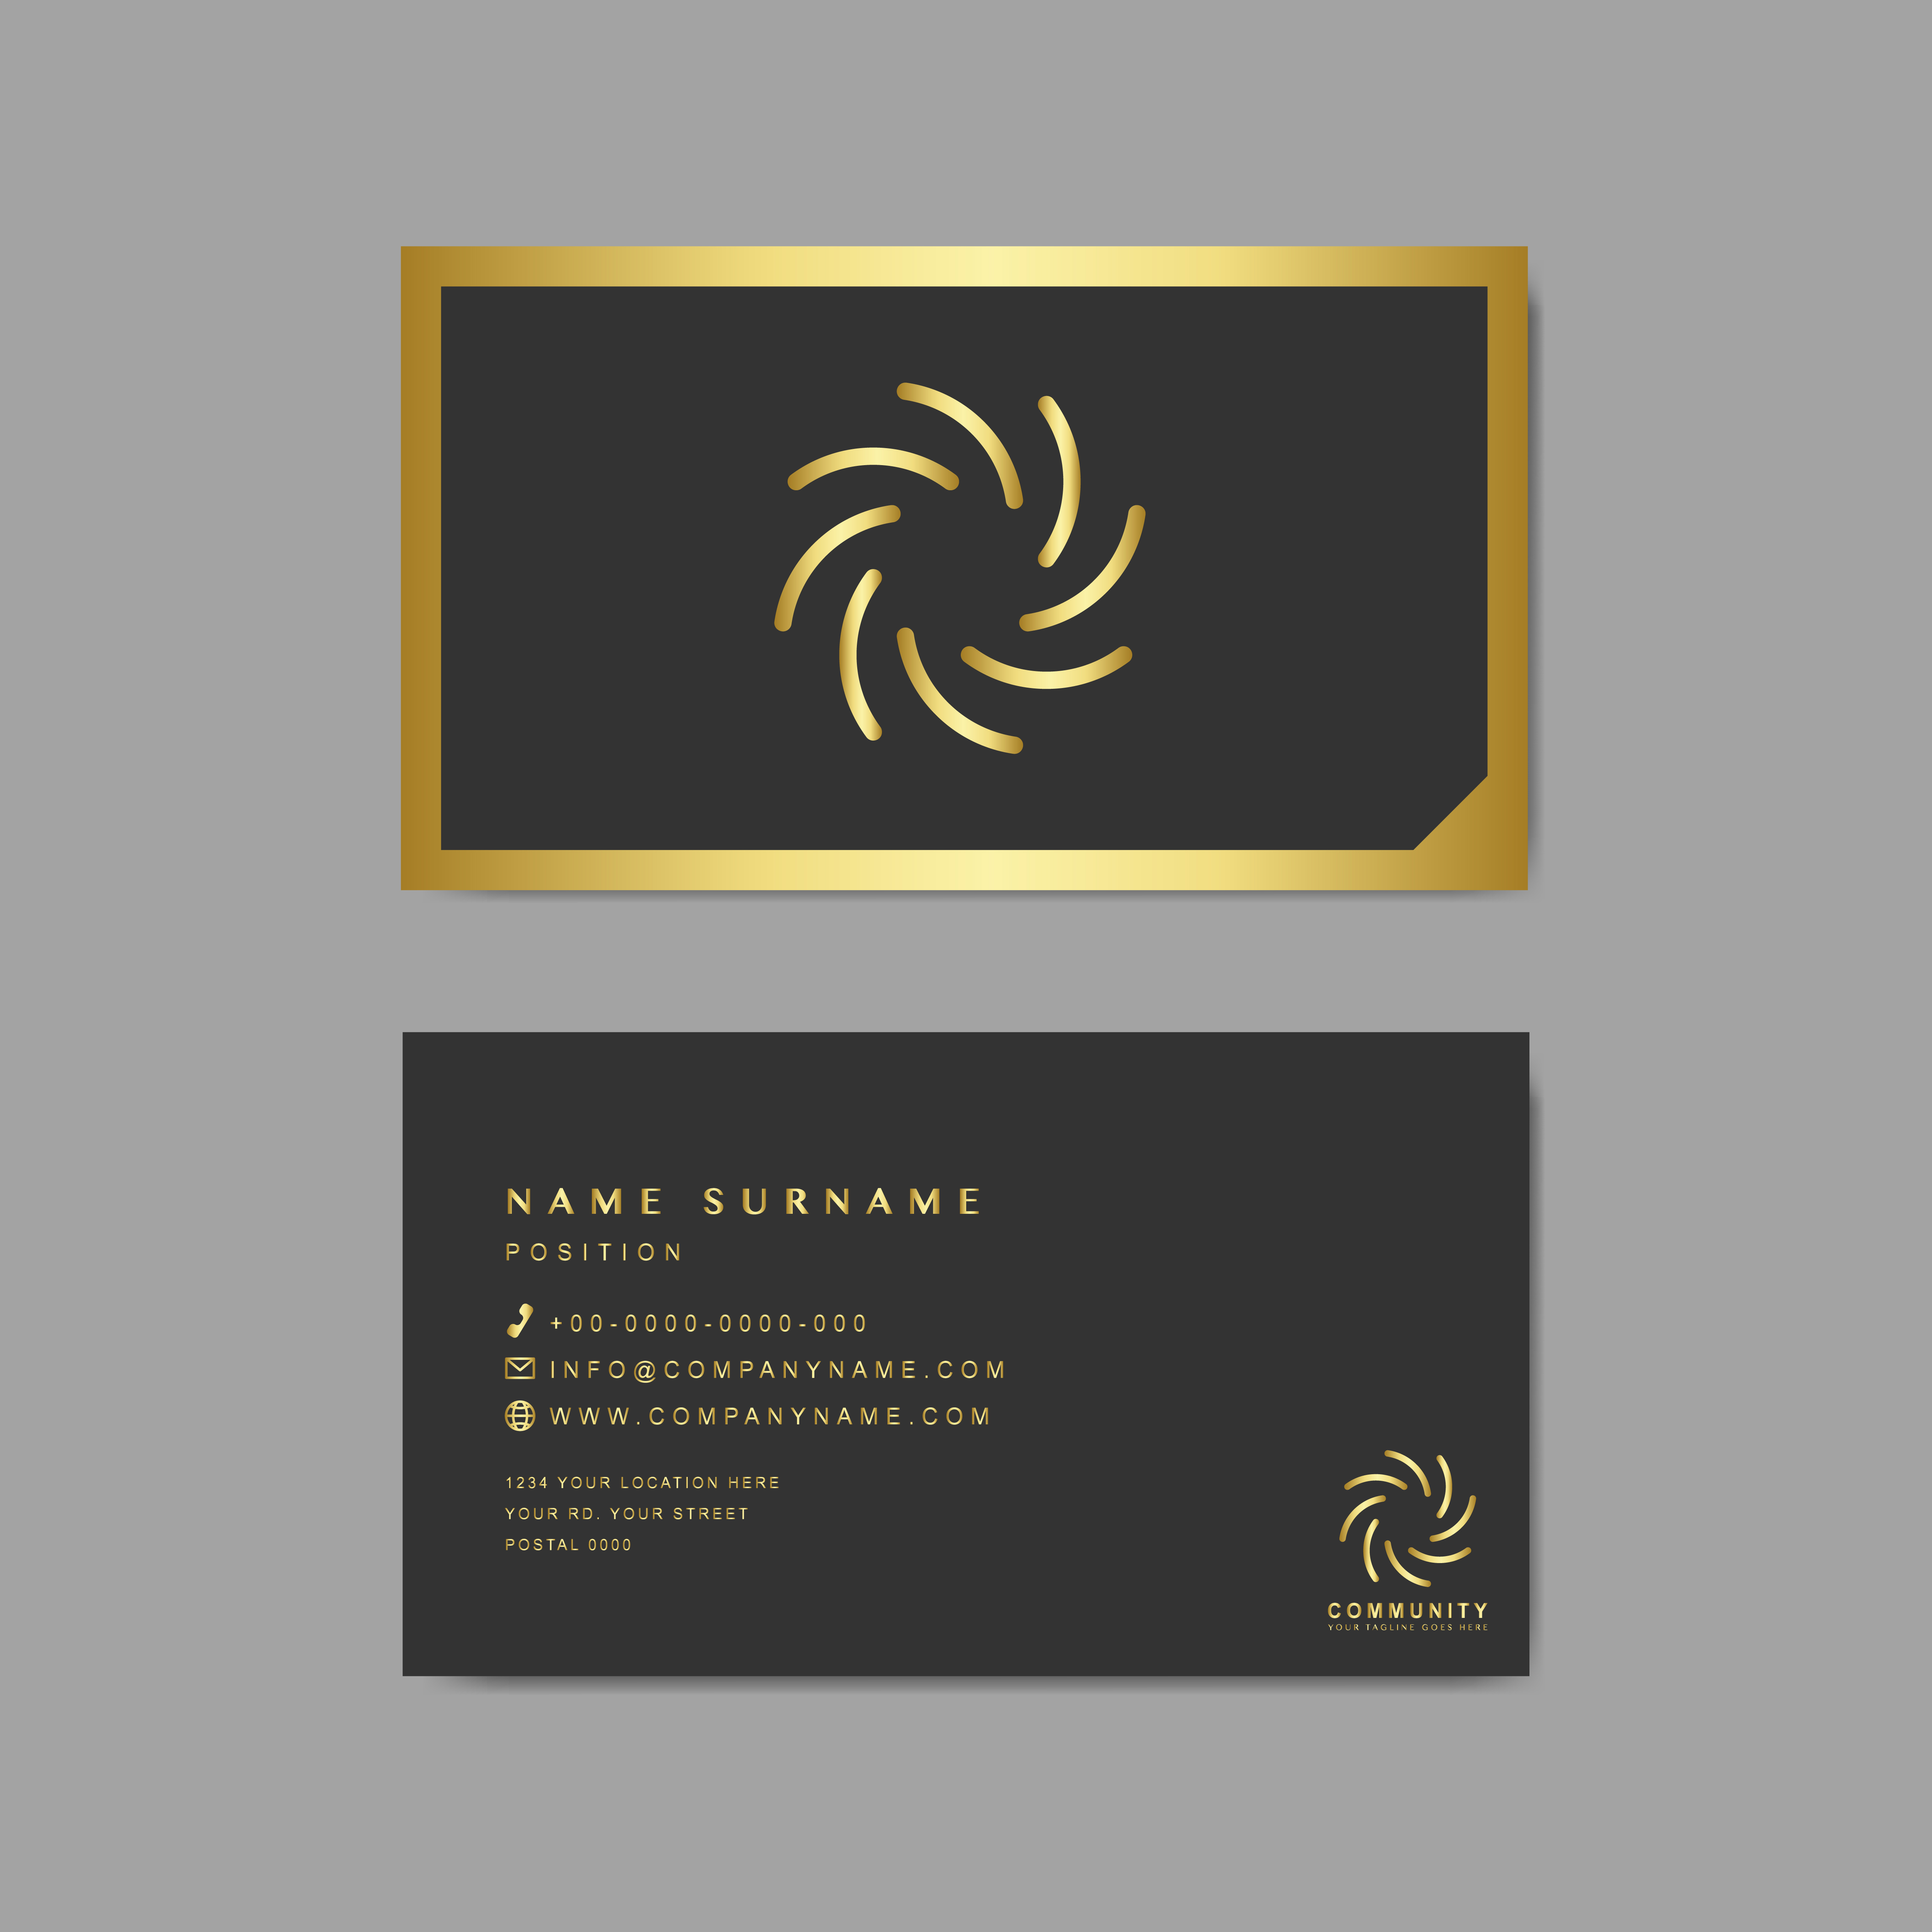 Business card sample design template - Download Free Vectors, Clipart ...